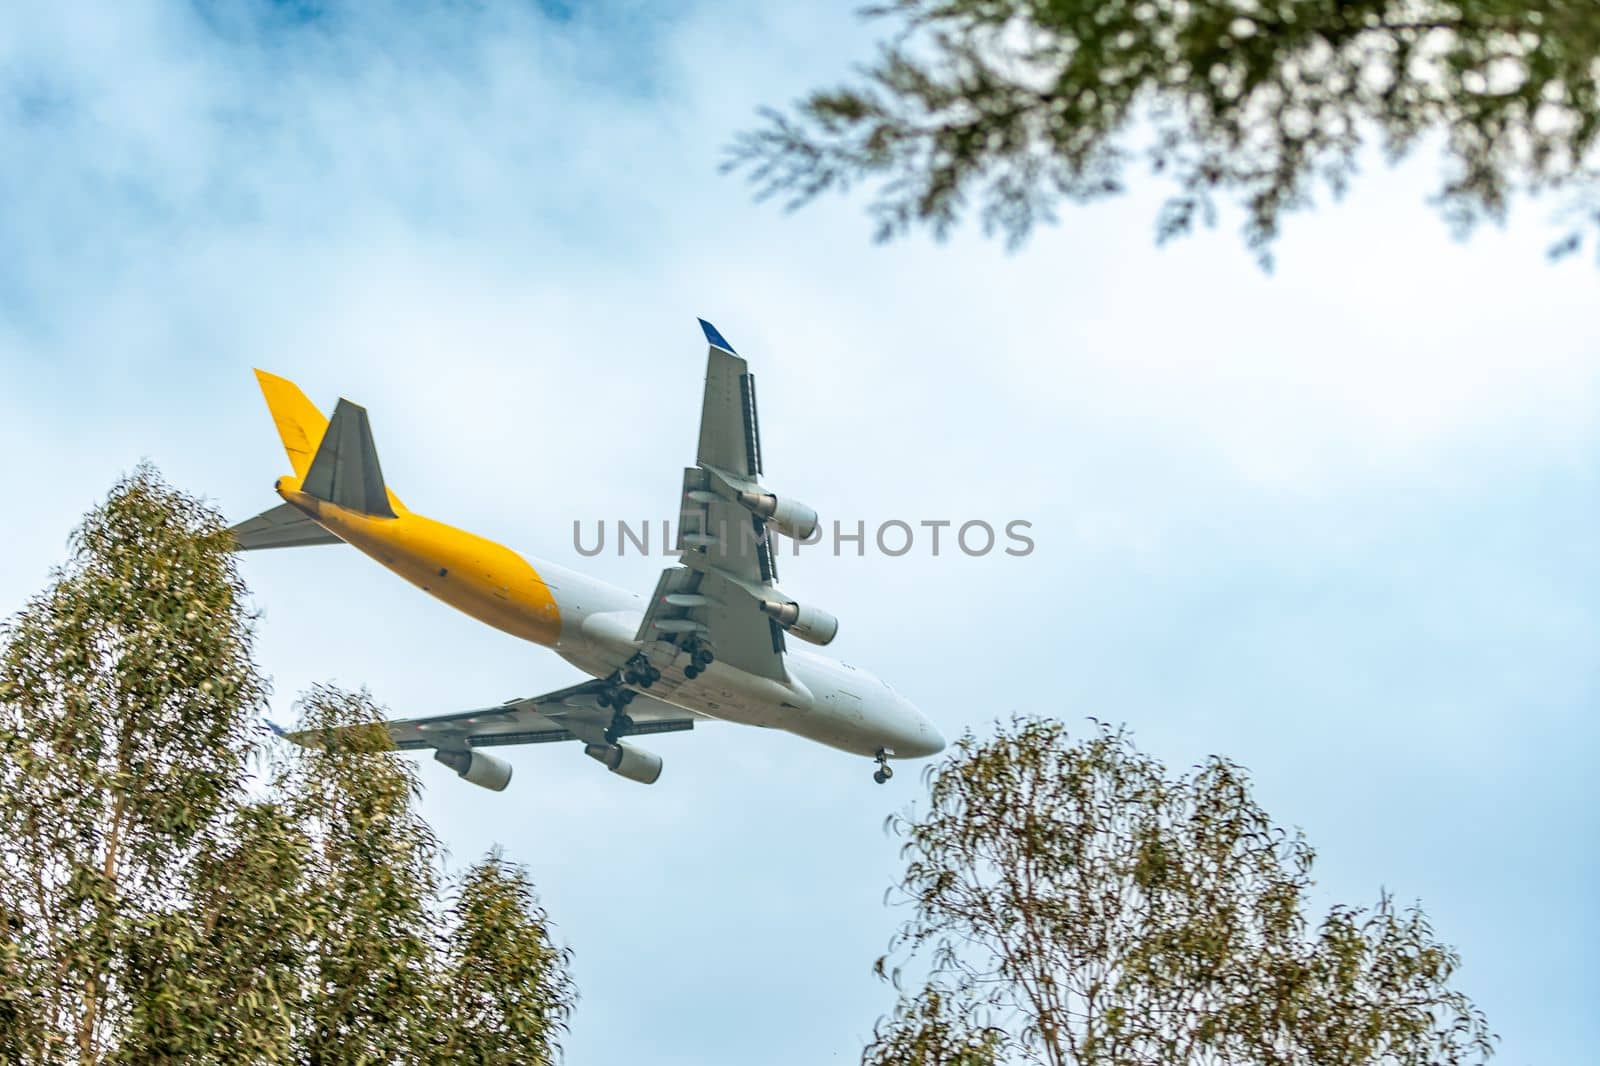 the plane lands above the treetops.